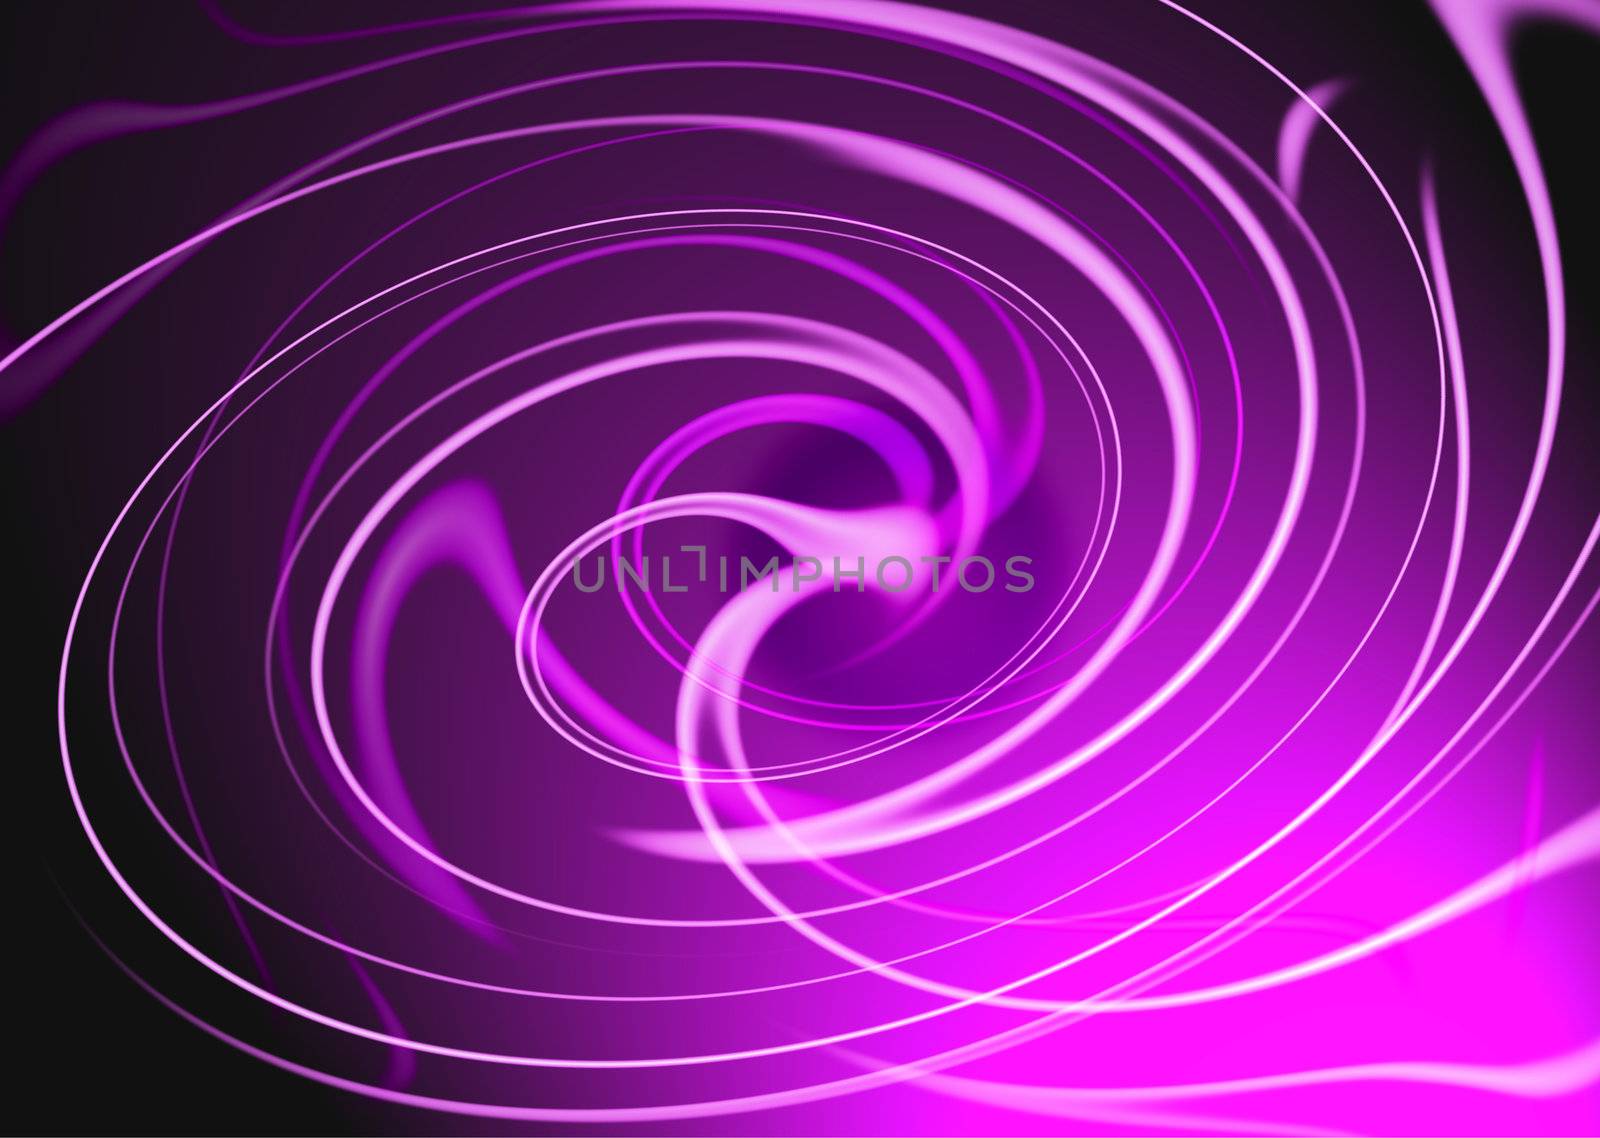 Abstract pink and purple background with a swirling design